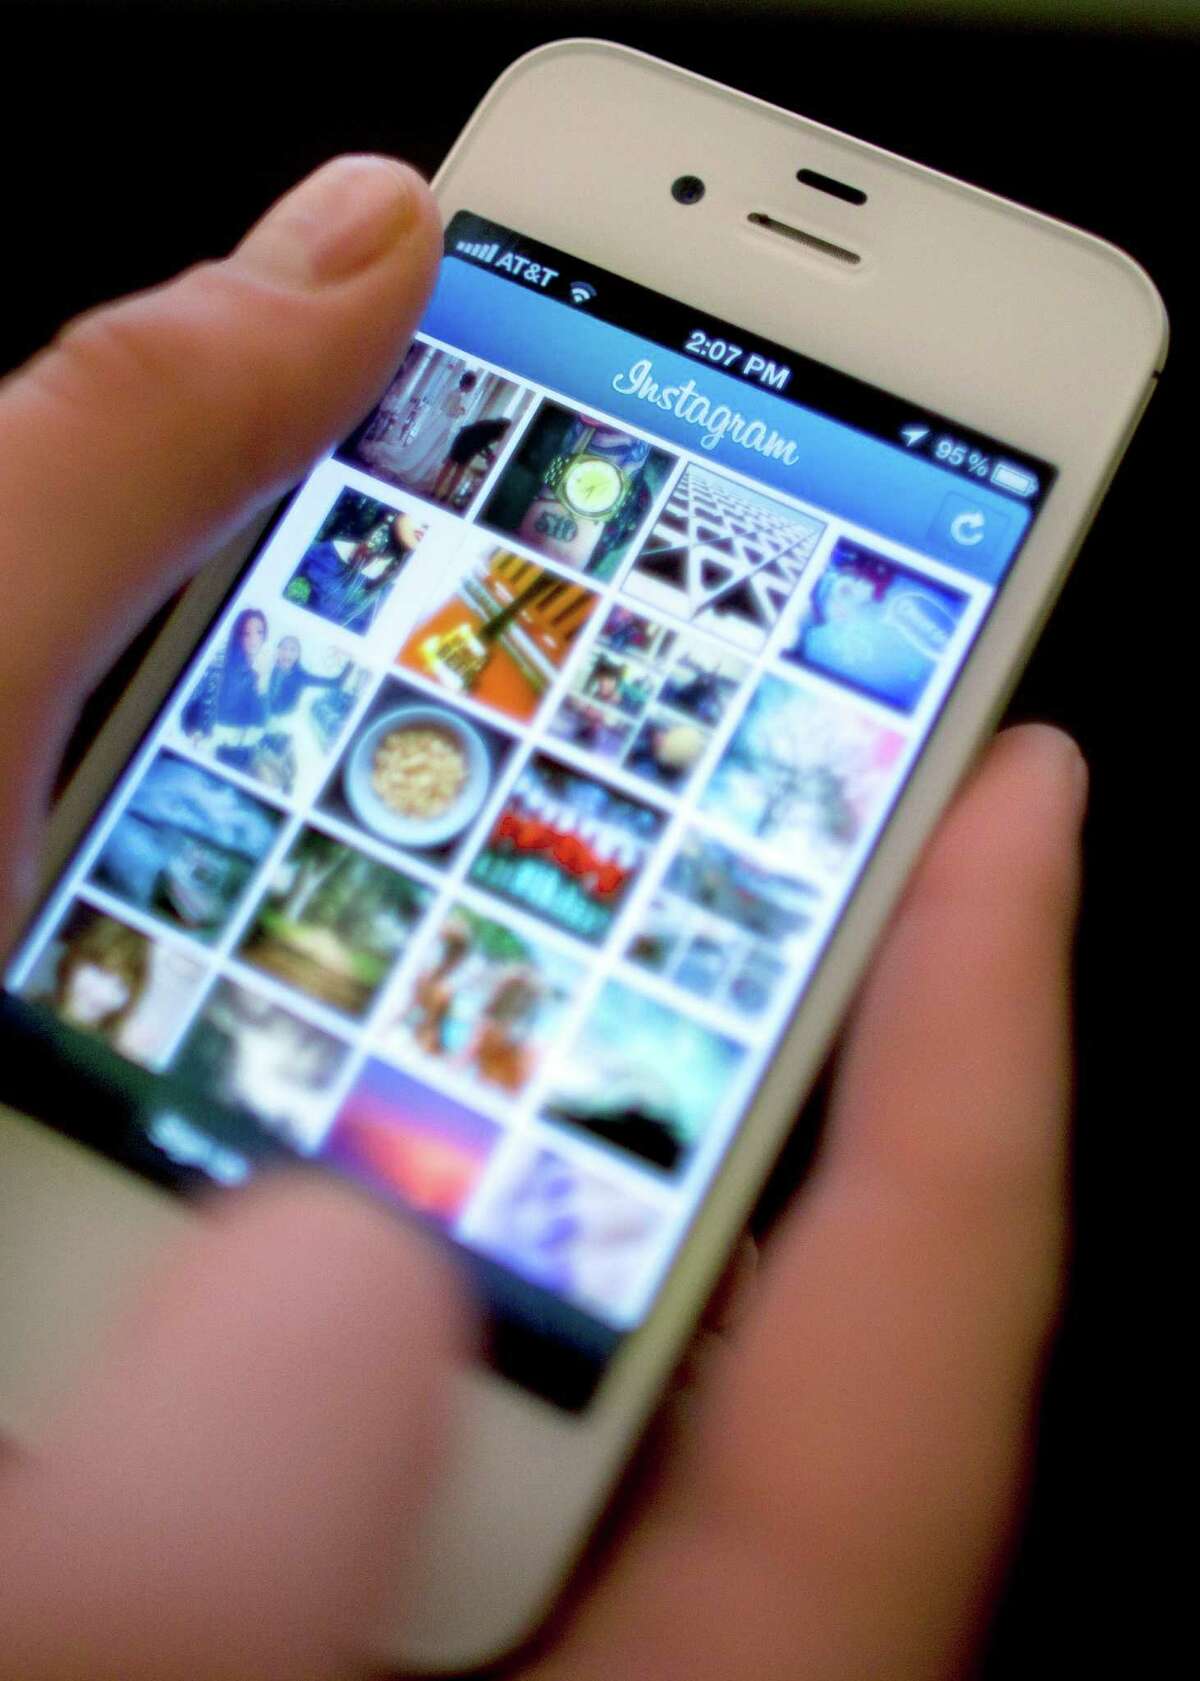 Instagram lets people apply filters to photos they snap with their mobile devices and share them with friends and strangers. Girls with low self-esteem often compare themselves unfavorably to photos they see on social media.